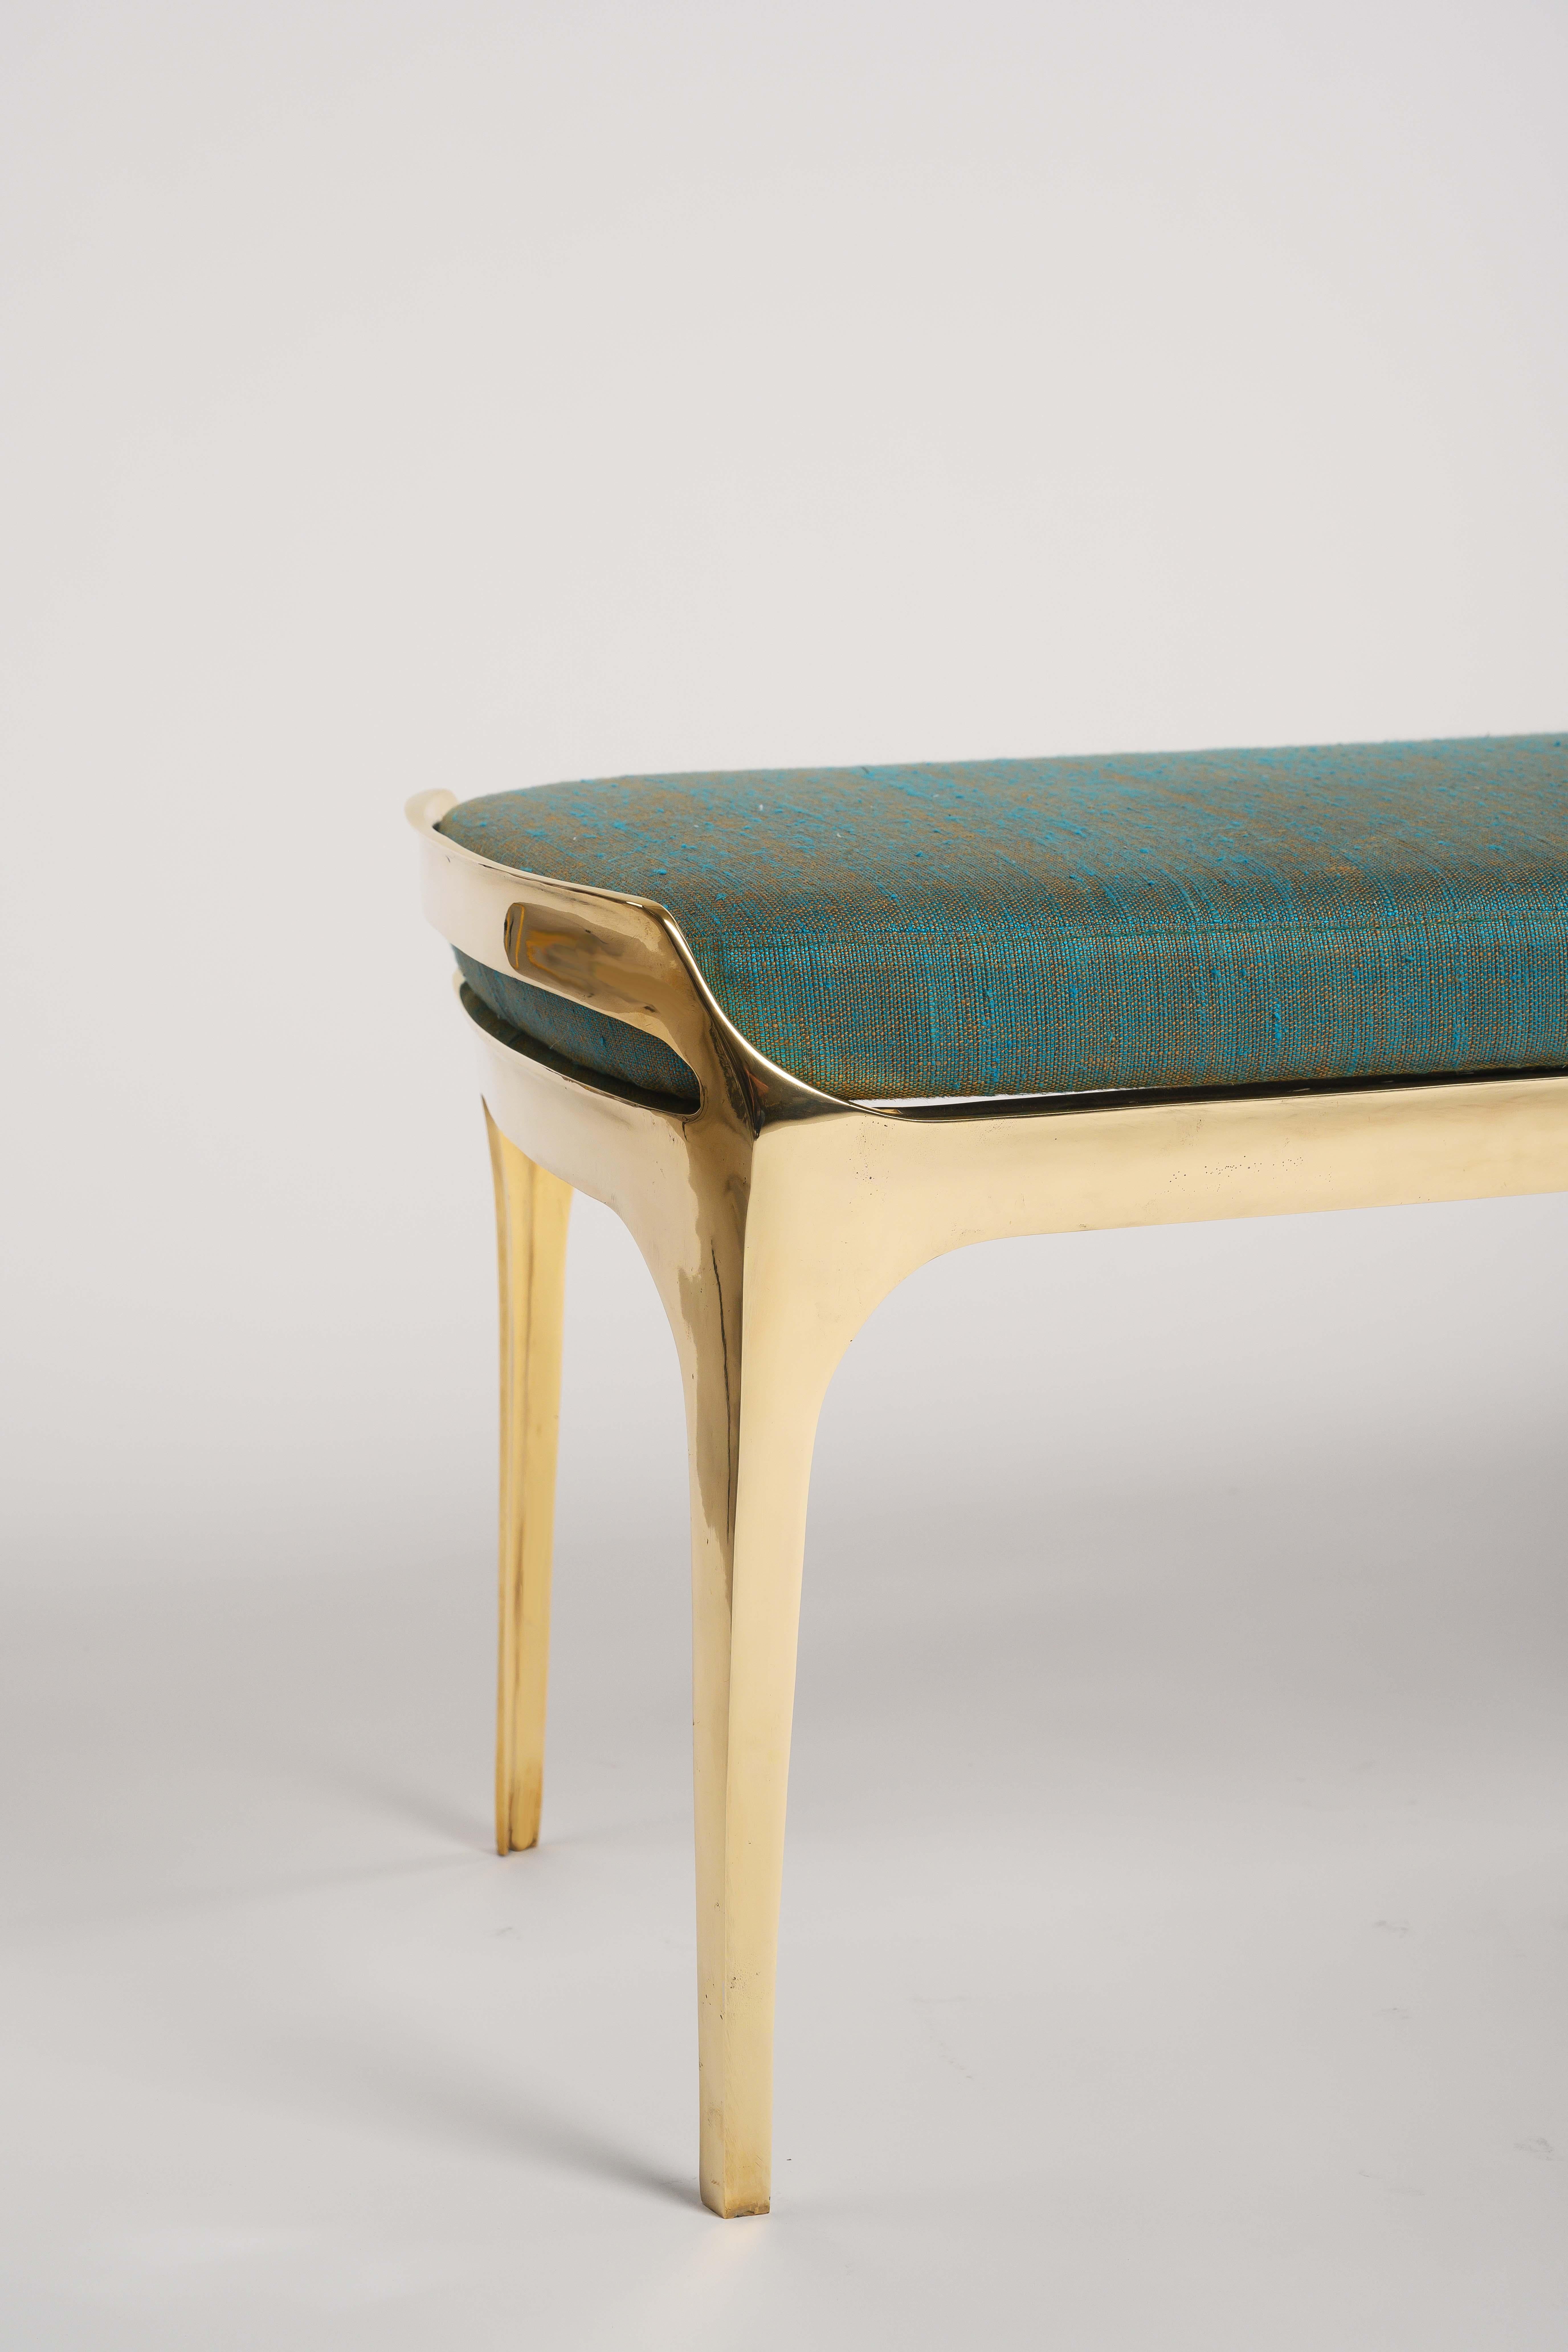 Available now at the Elan Atelier NY Showroom.

Cast bronze Bruda bench in polished gold frame finish with marine blue silk-linen seat cushion. 

Gold and silk, two great prizes of antiquity, are combined in the Bruda Bench into a faintly nautical